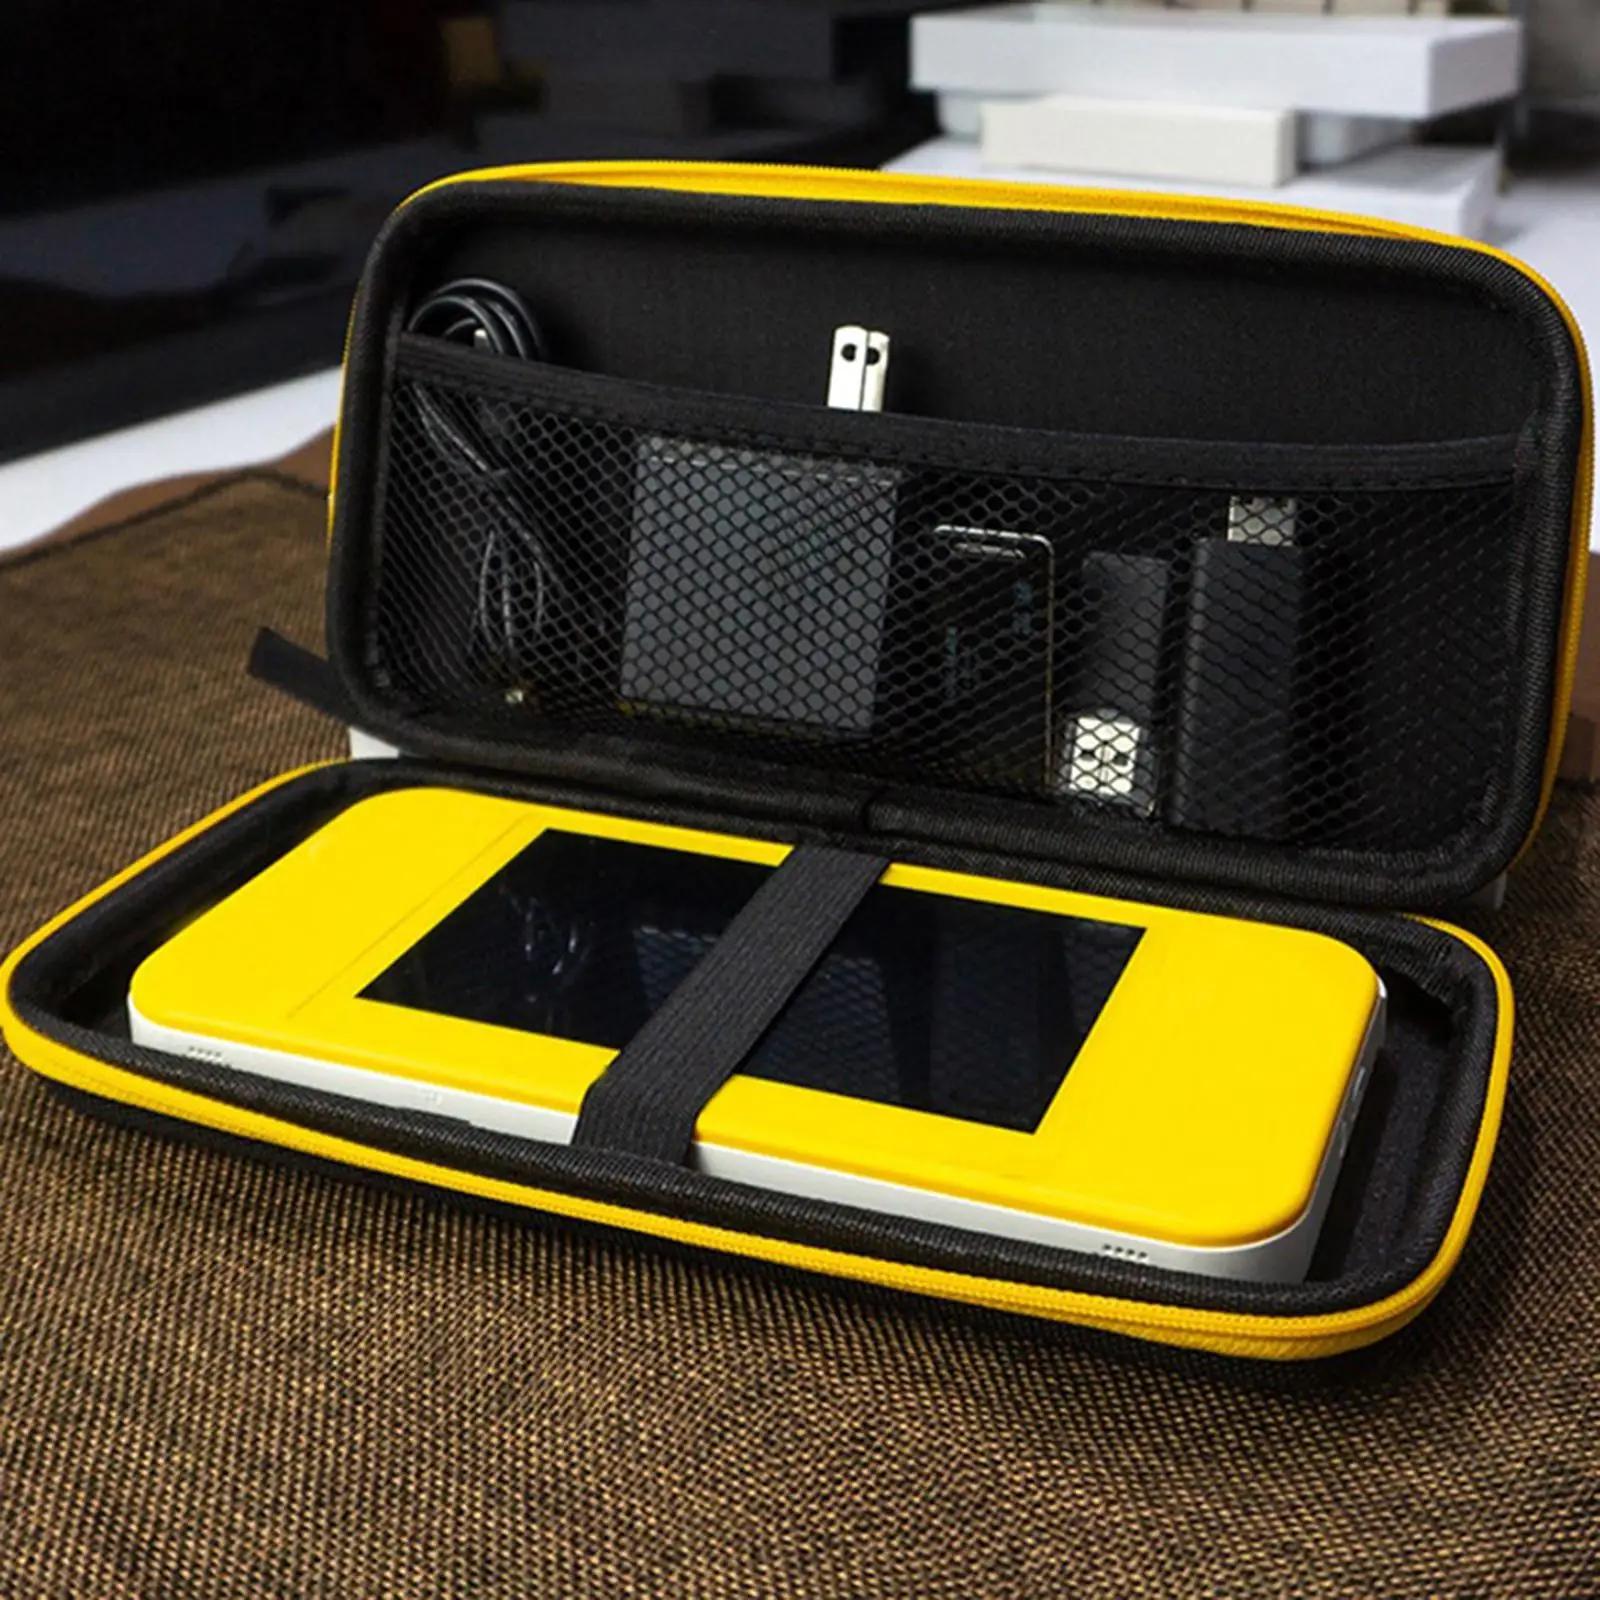 Shockproof Carrying Case Dustproof Black Suitcase Bag Portable Hard Shell Pouch EVA Case Accessories for Pocket 3 Game Console